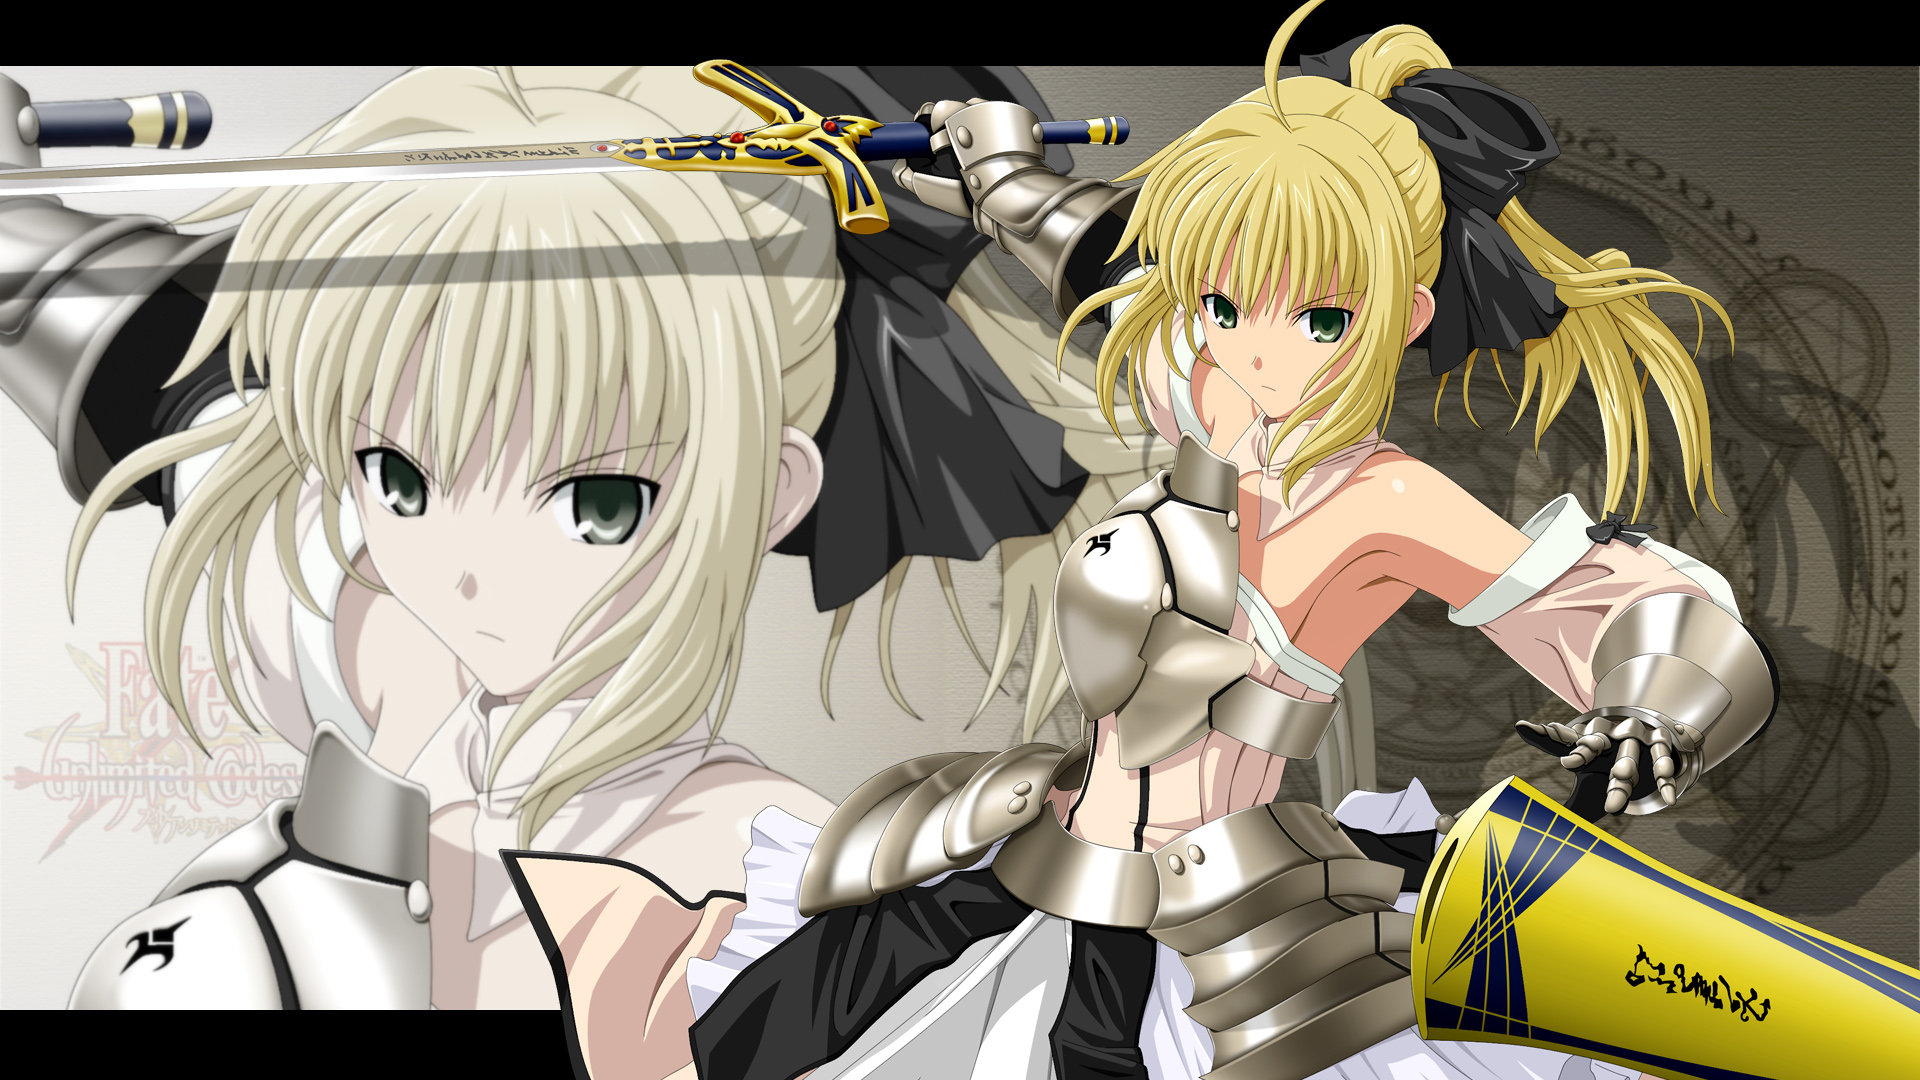 Fate/unlimited codes: Saber Lily - Anime character with sword in hand on a vibrant background.